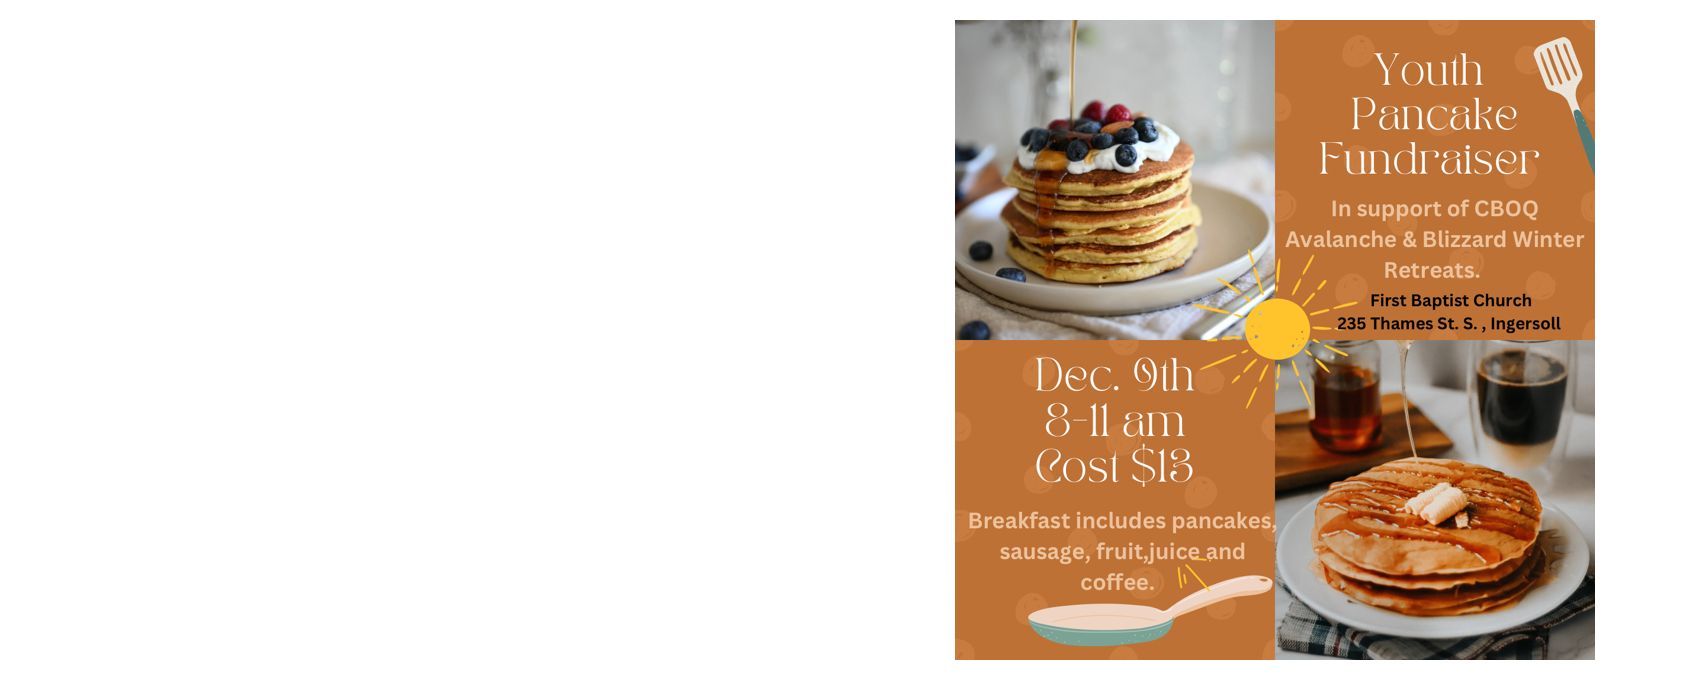 Youth Fundraiser: Pancake Breakfast, Sat. Dec. 9, 2023 @ 8:00 a.m. Sunday School HallCost: $13.00 - includes pancakes, sausages, coffee/tea and juice. Funds raised will go towards our youth going to CBOQ Avalanche &amp; Blizzard winter retreat at Muskoka Woods Camp.&nbsp; Please call the church office at 519-485-3046 or email: fbingersoll@gmail.com&nbsp;if you would like to attend.